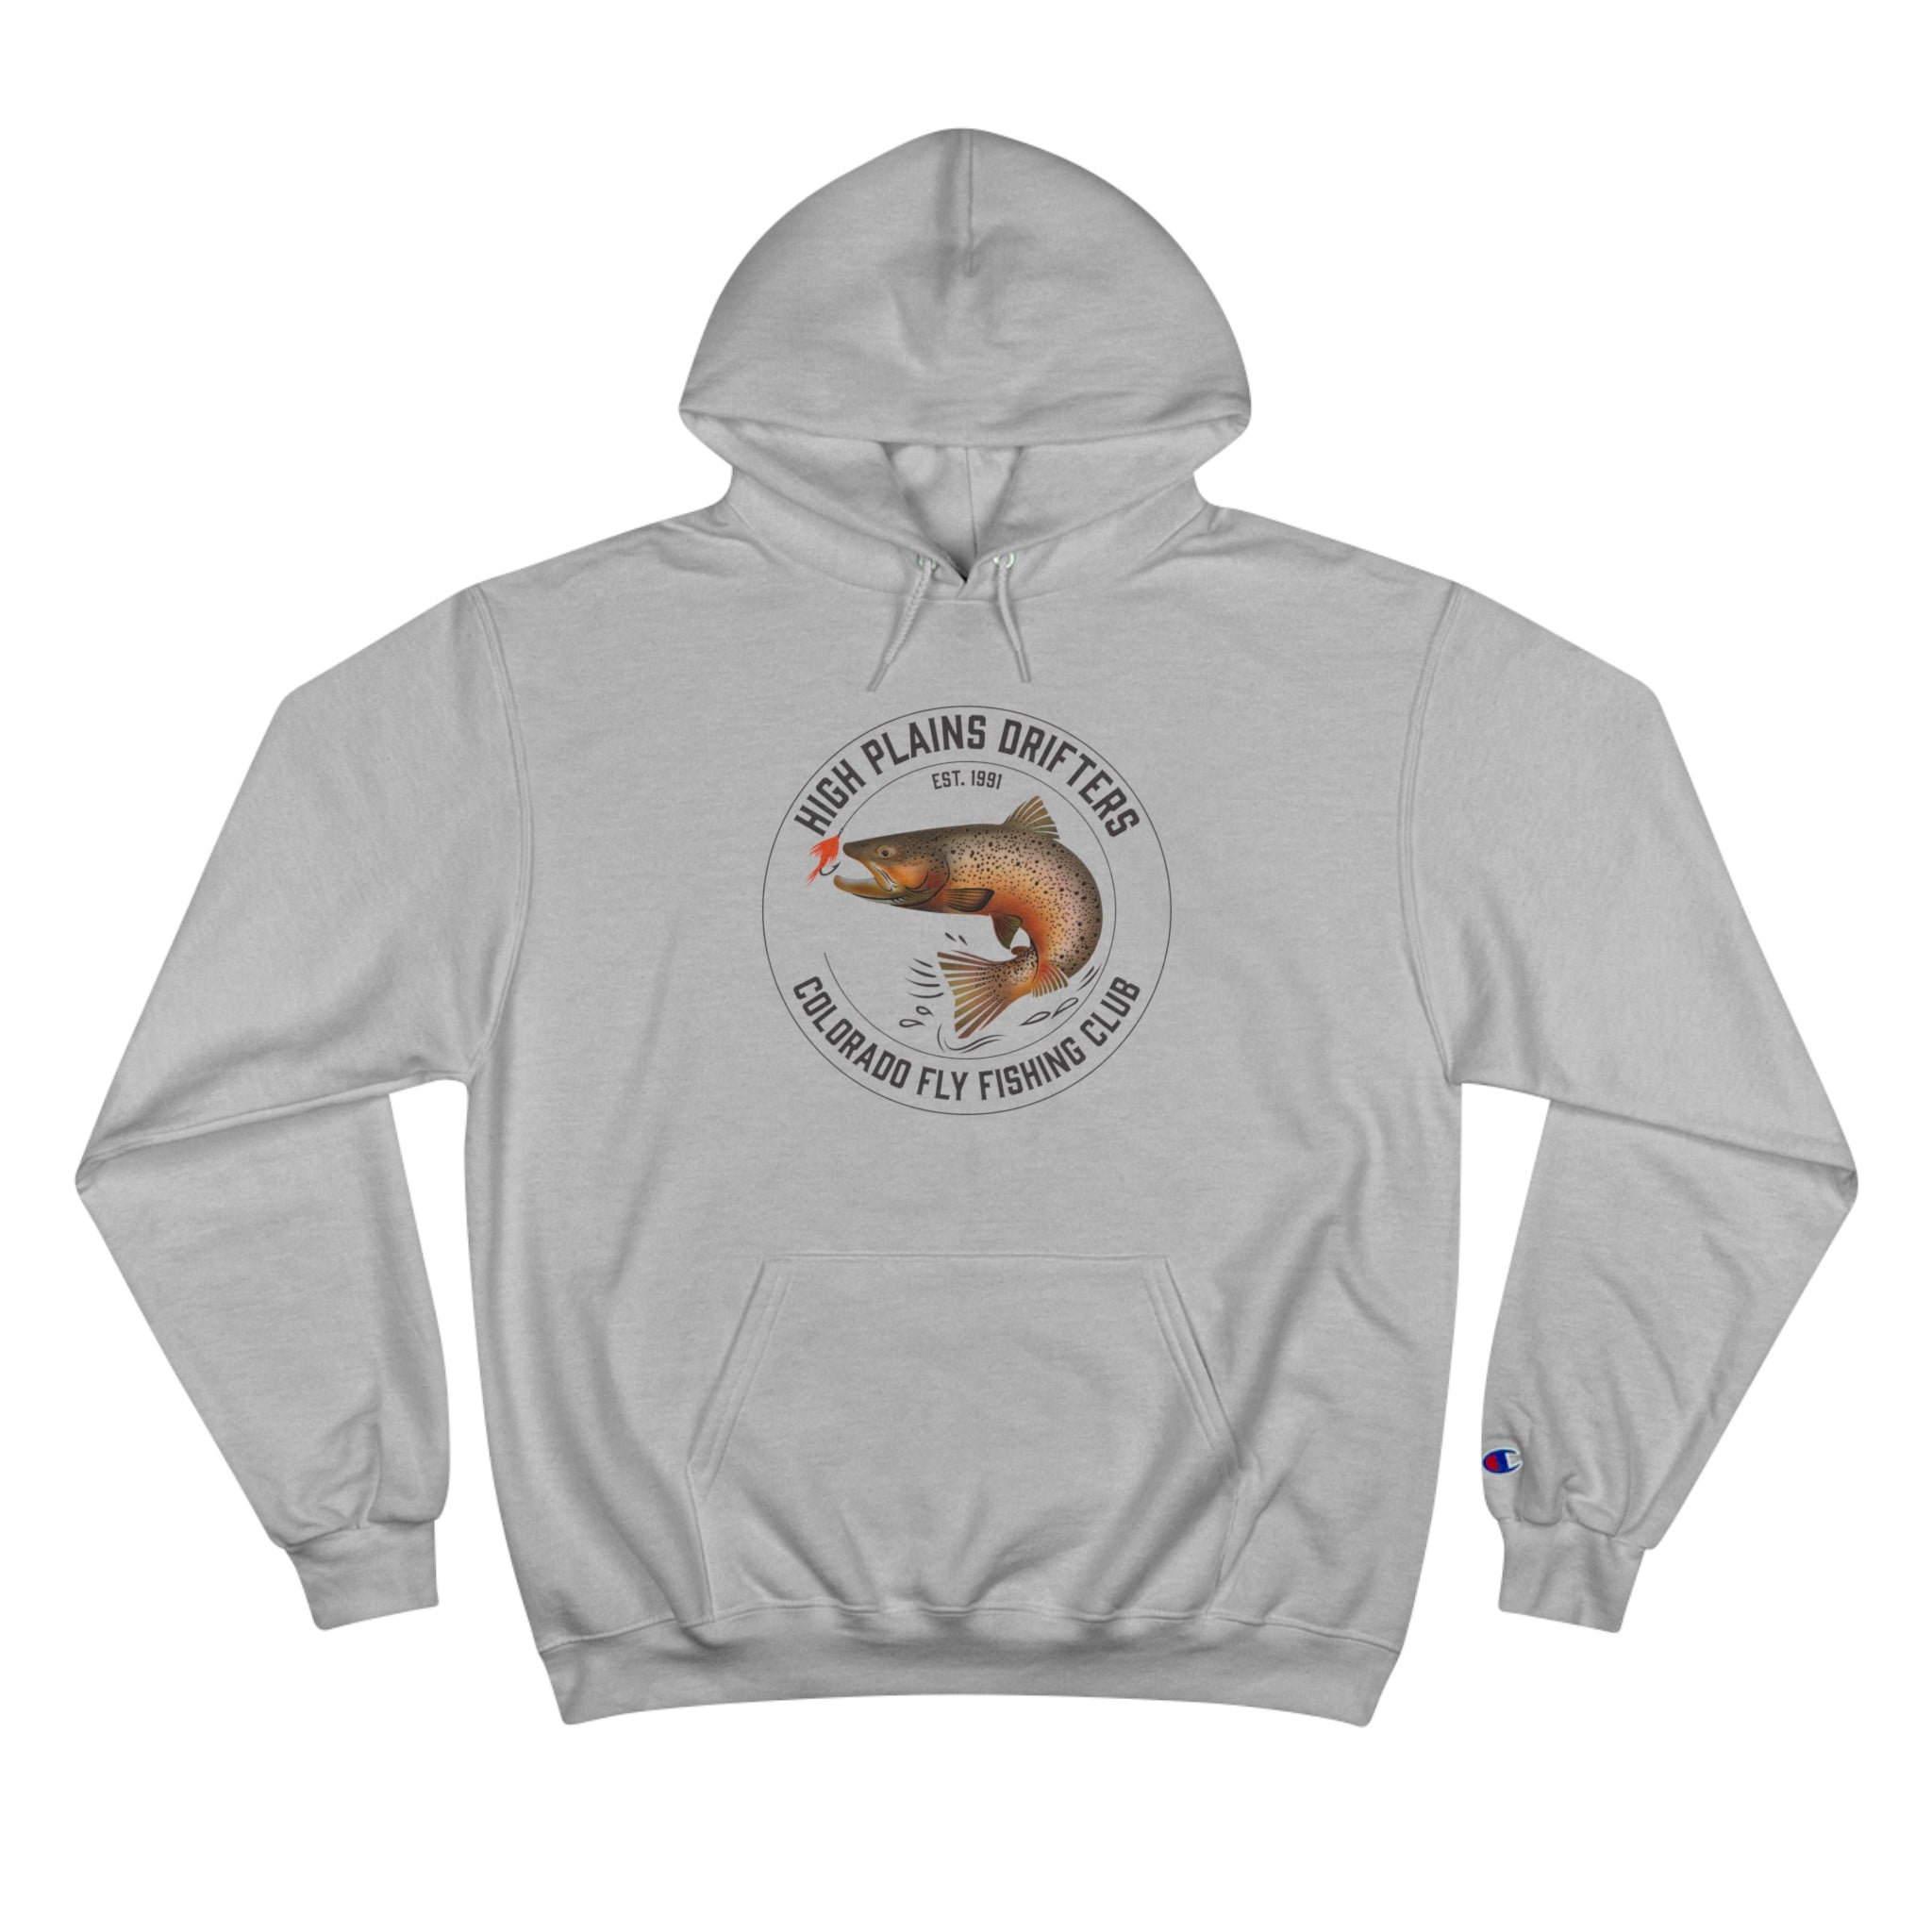 HPD Hoodie with pocket - 3 Colors - Free Shipping! – High Plains Drifters Fly  Fishing Club